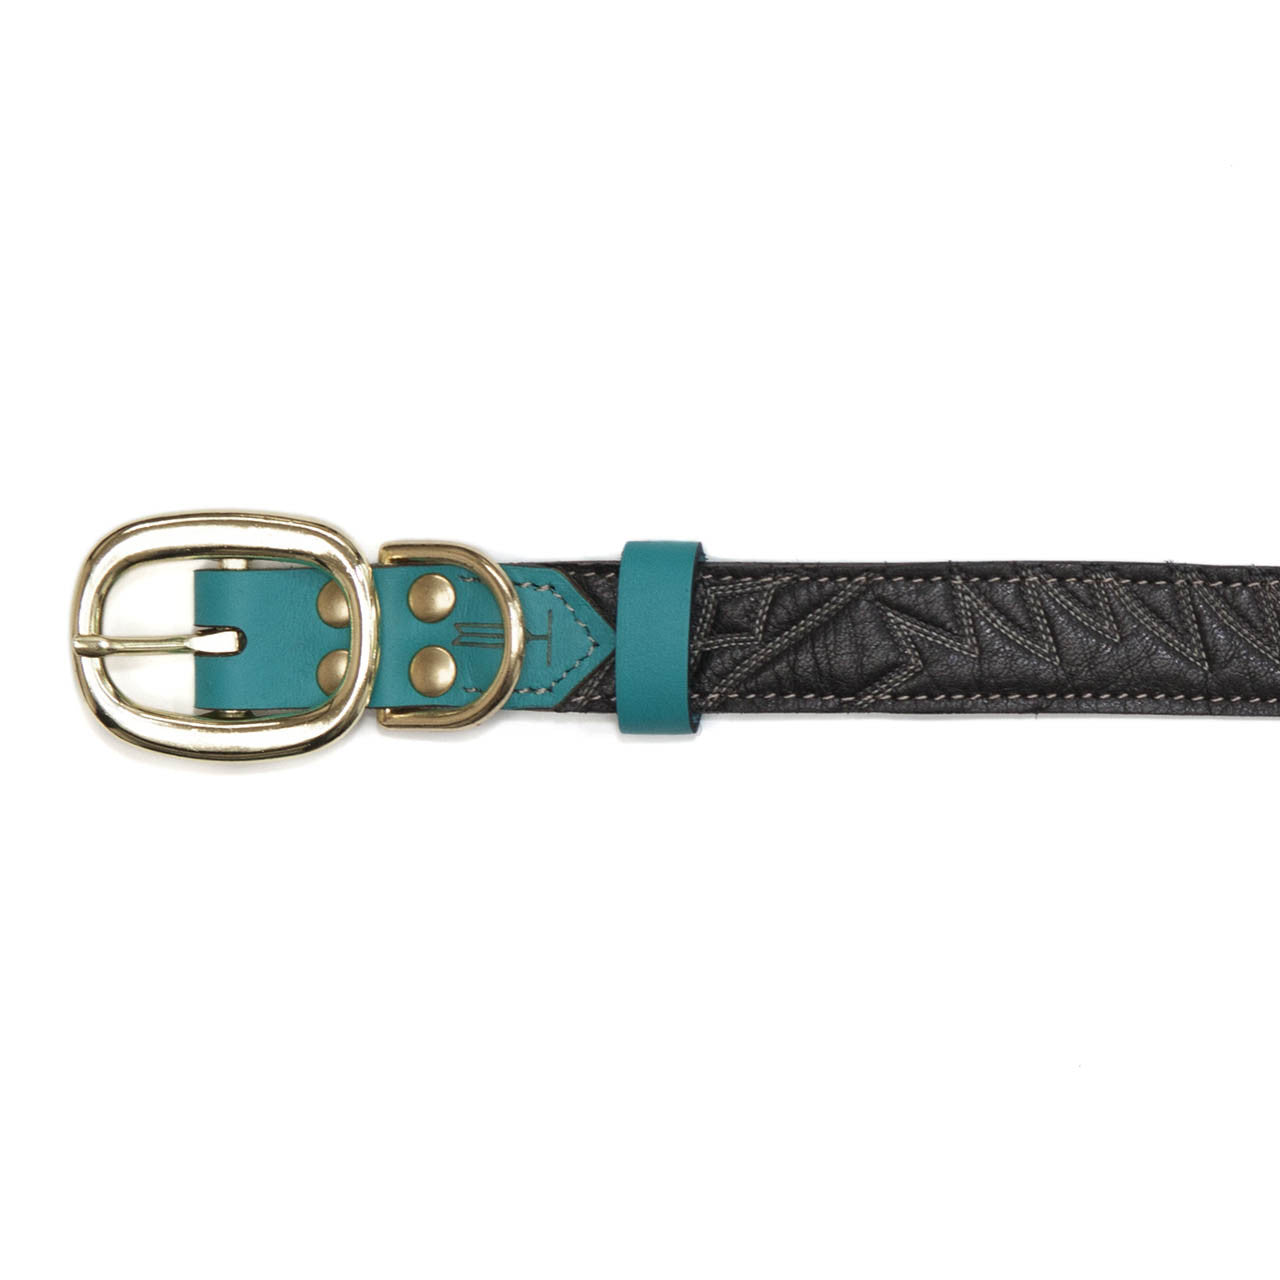 Turquoise Dog Collar with Black Leather + White Spike Stitching (buckle)